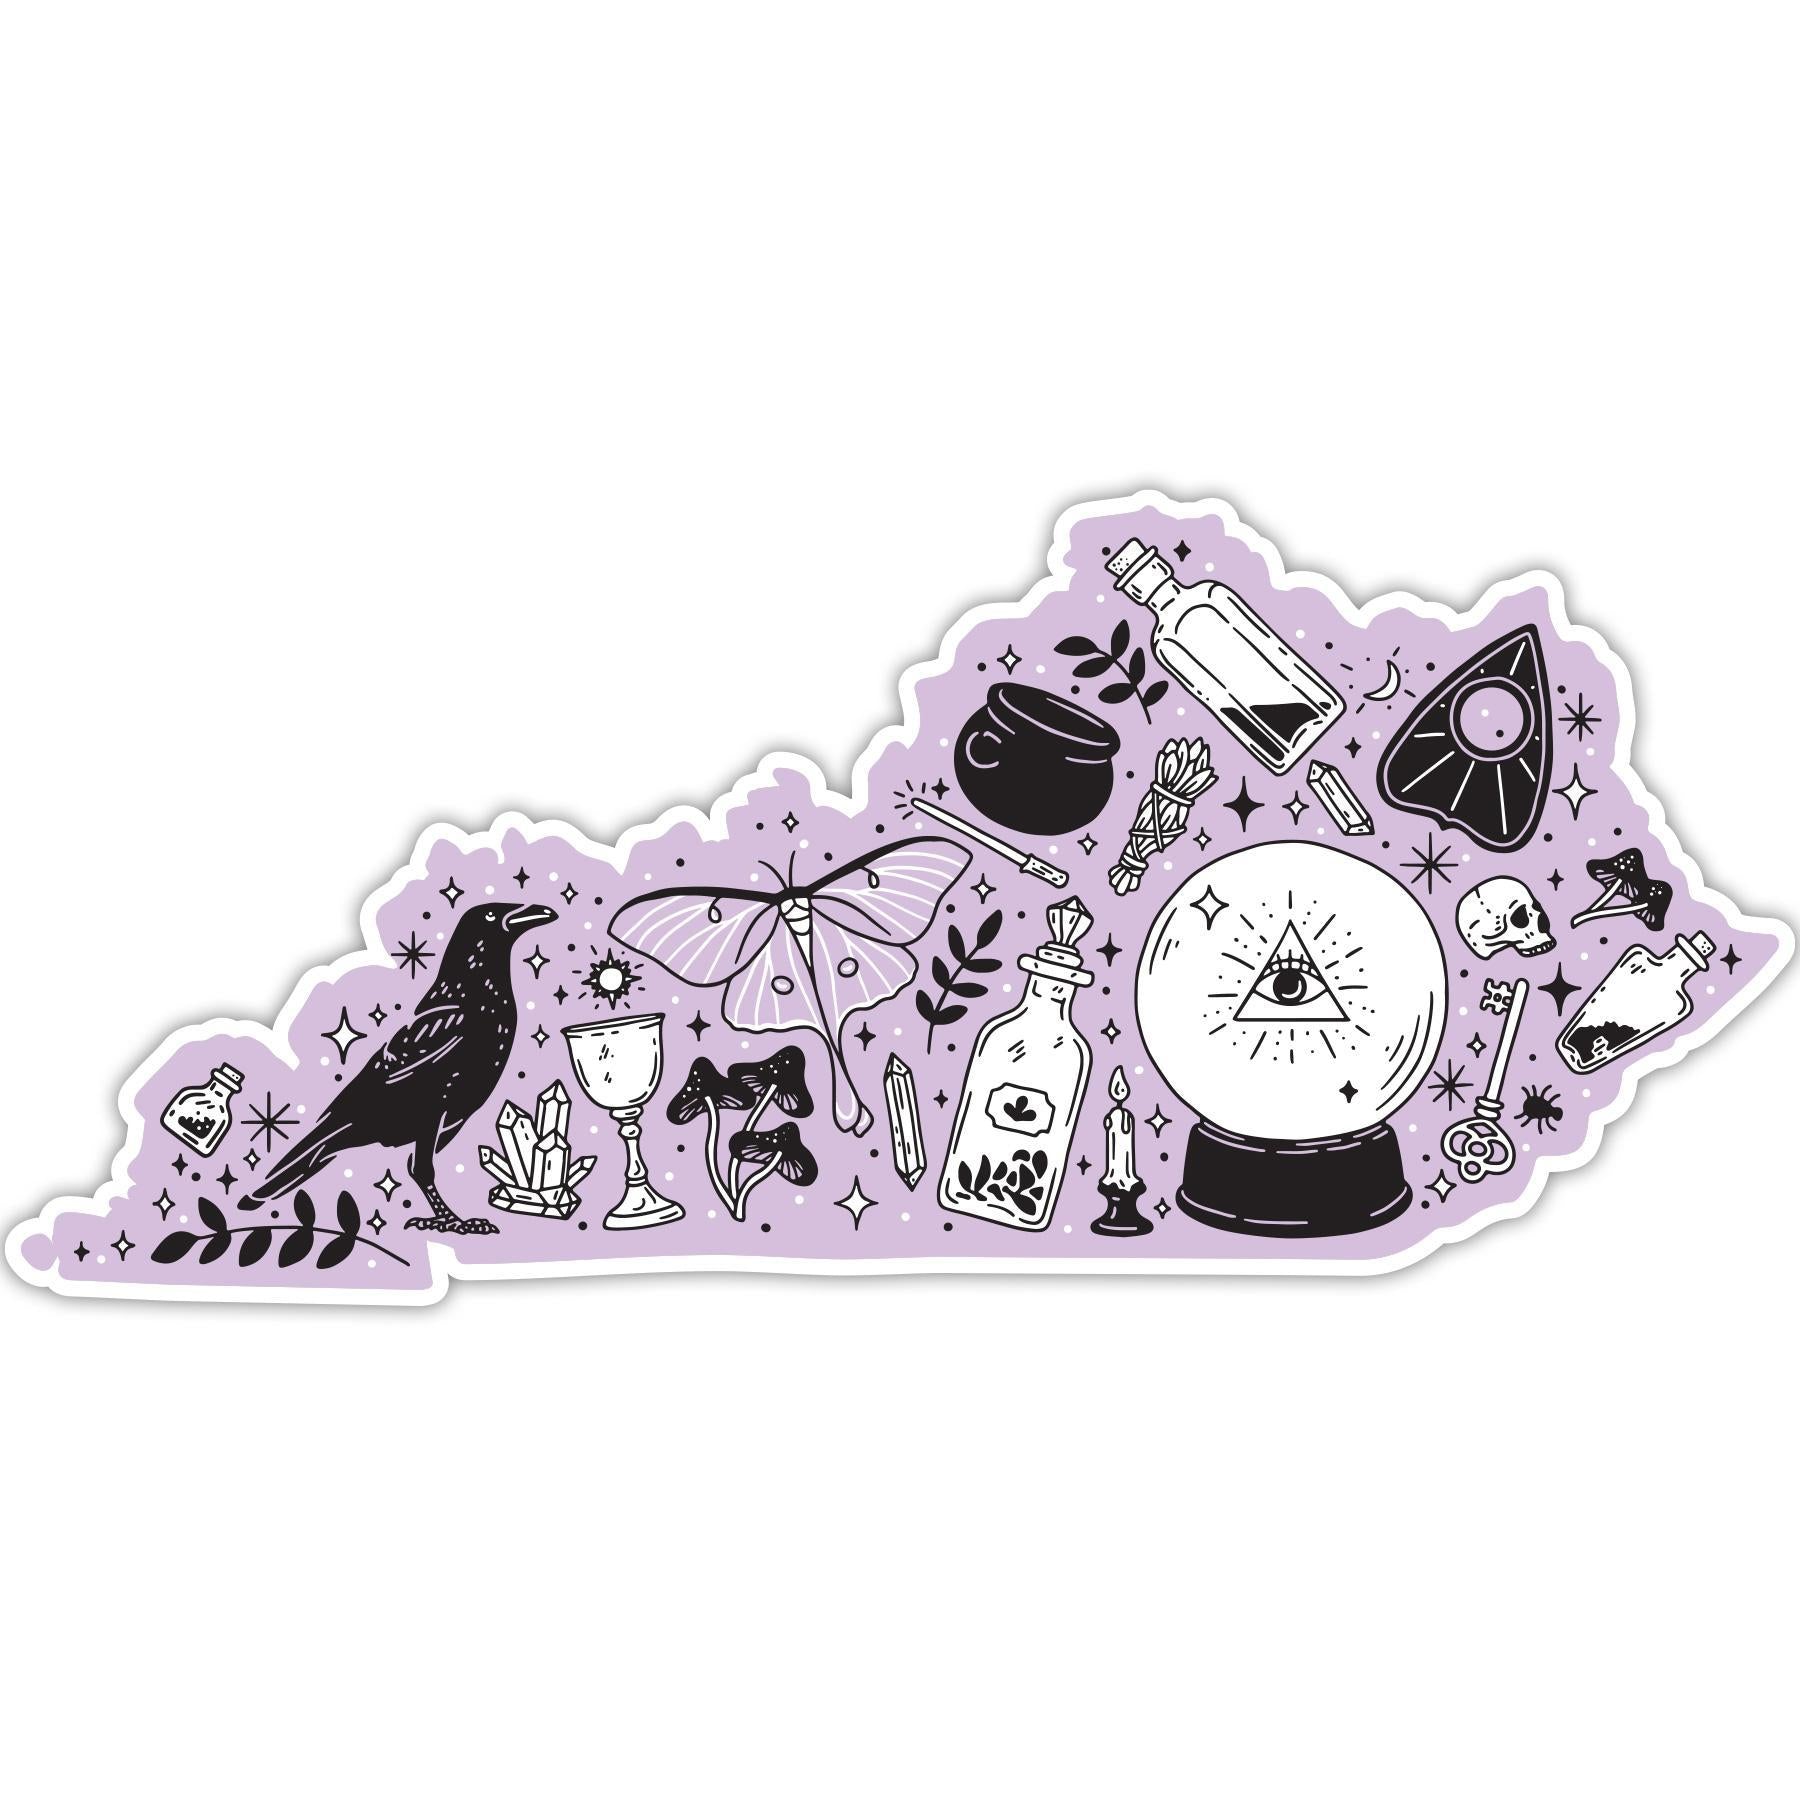 Witchy Stickers for Sale